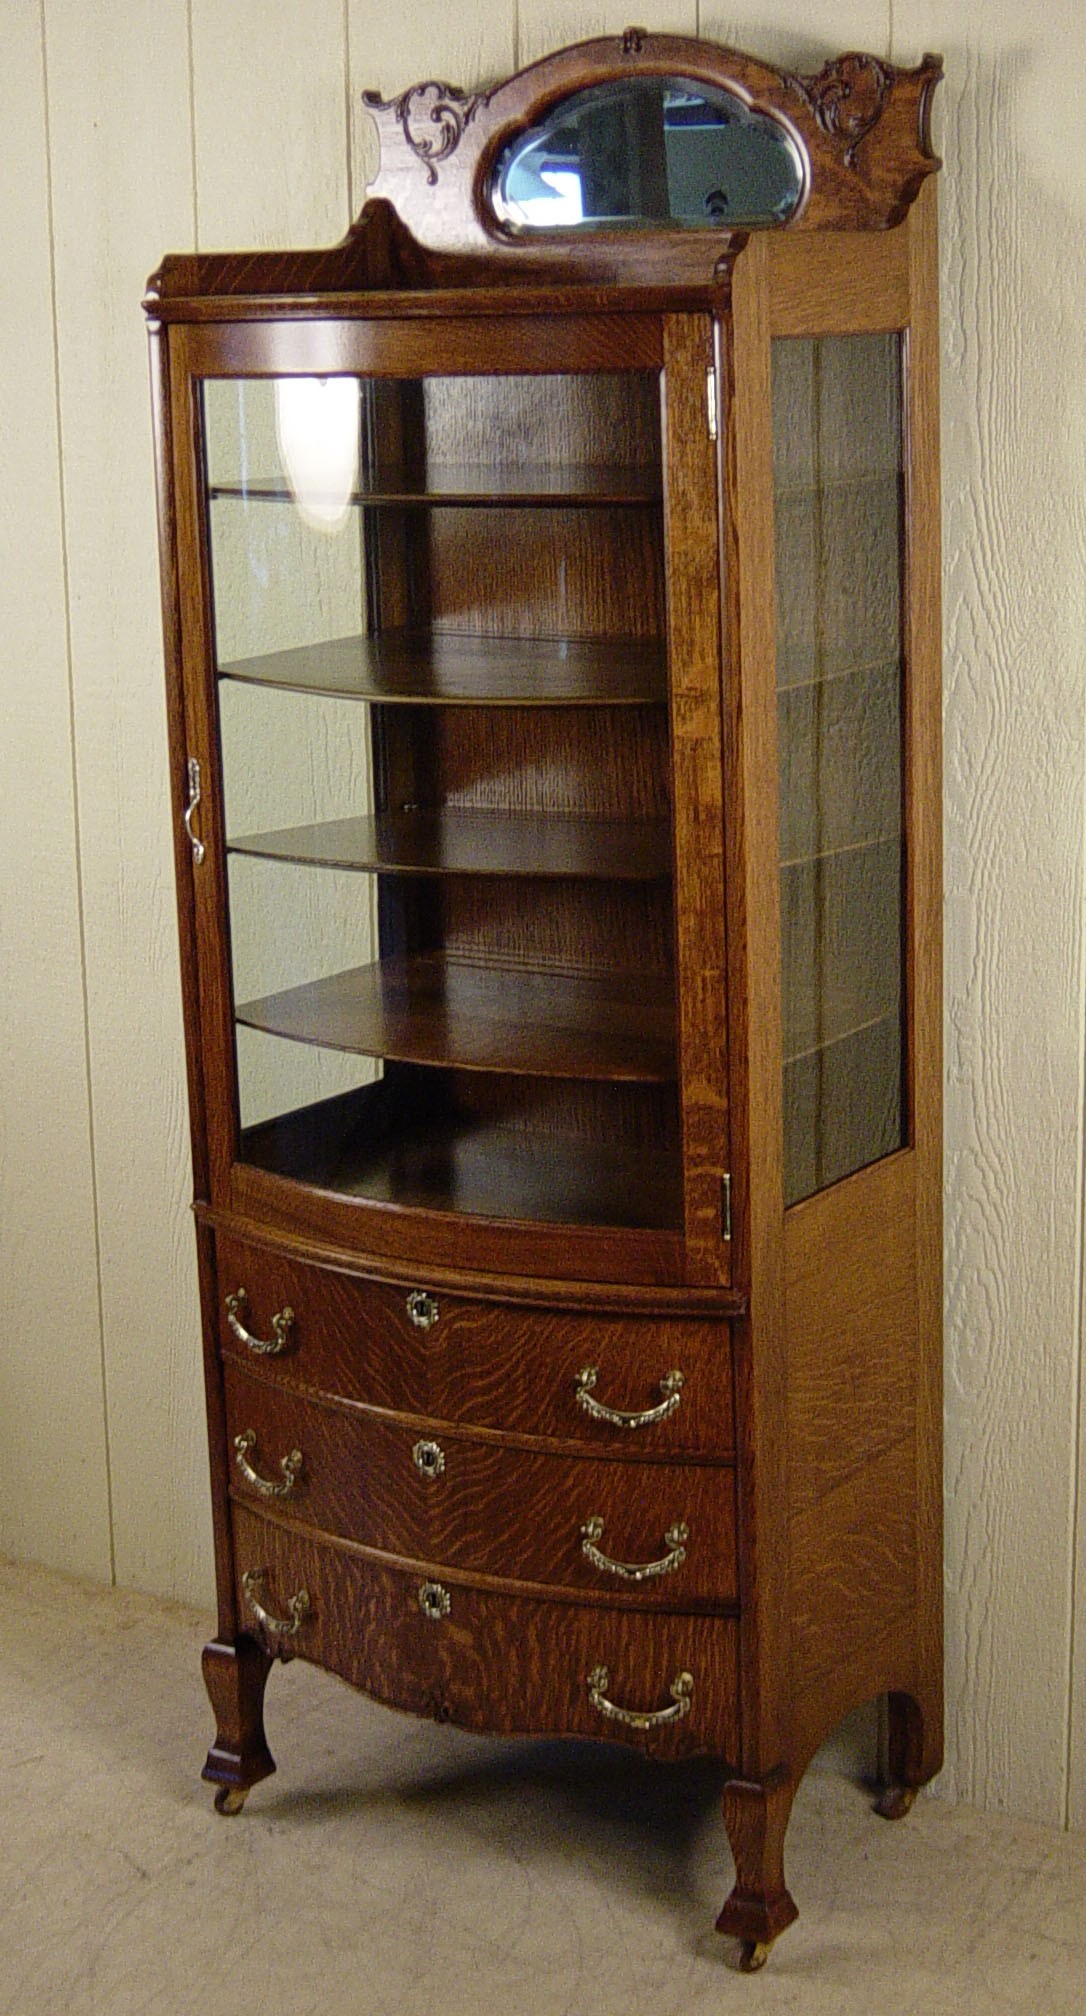 Very rare small oak curio cabinet with 3 drawers